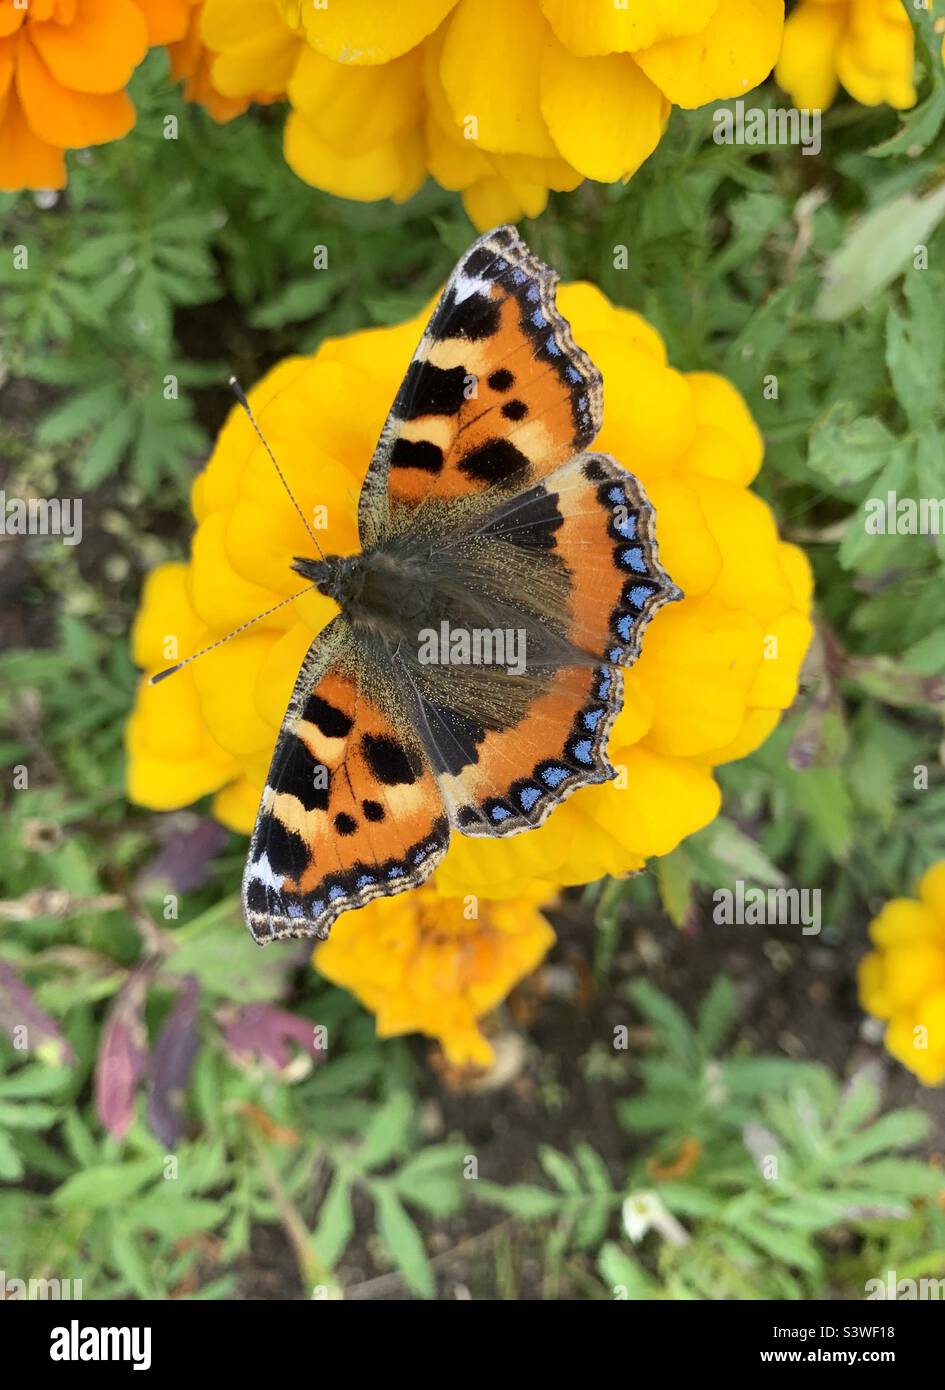 Dipinto di Lady butterfly Foto Stock